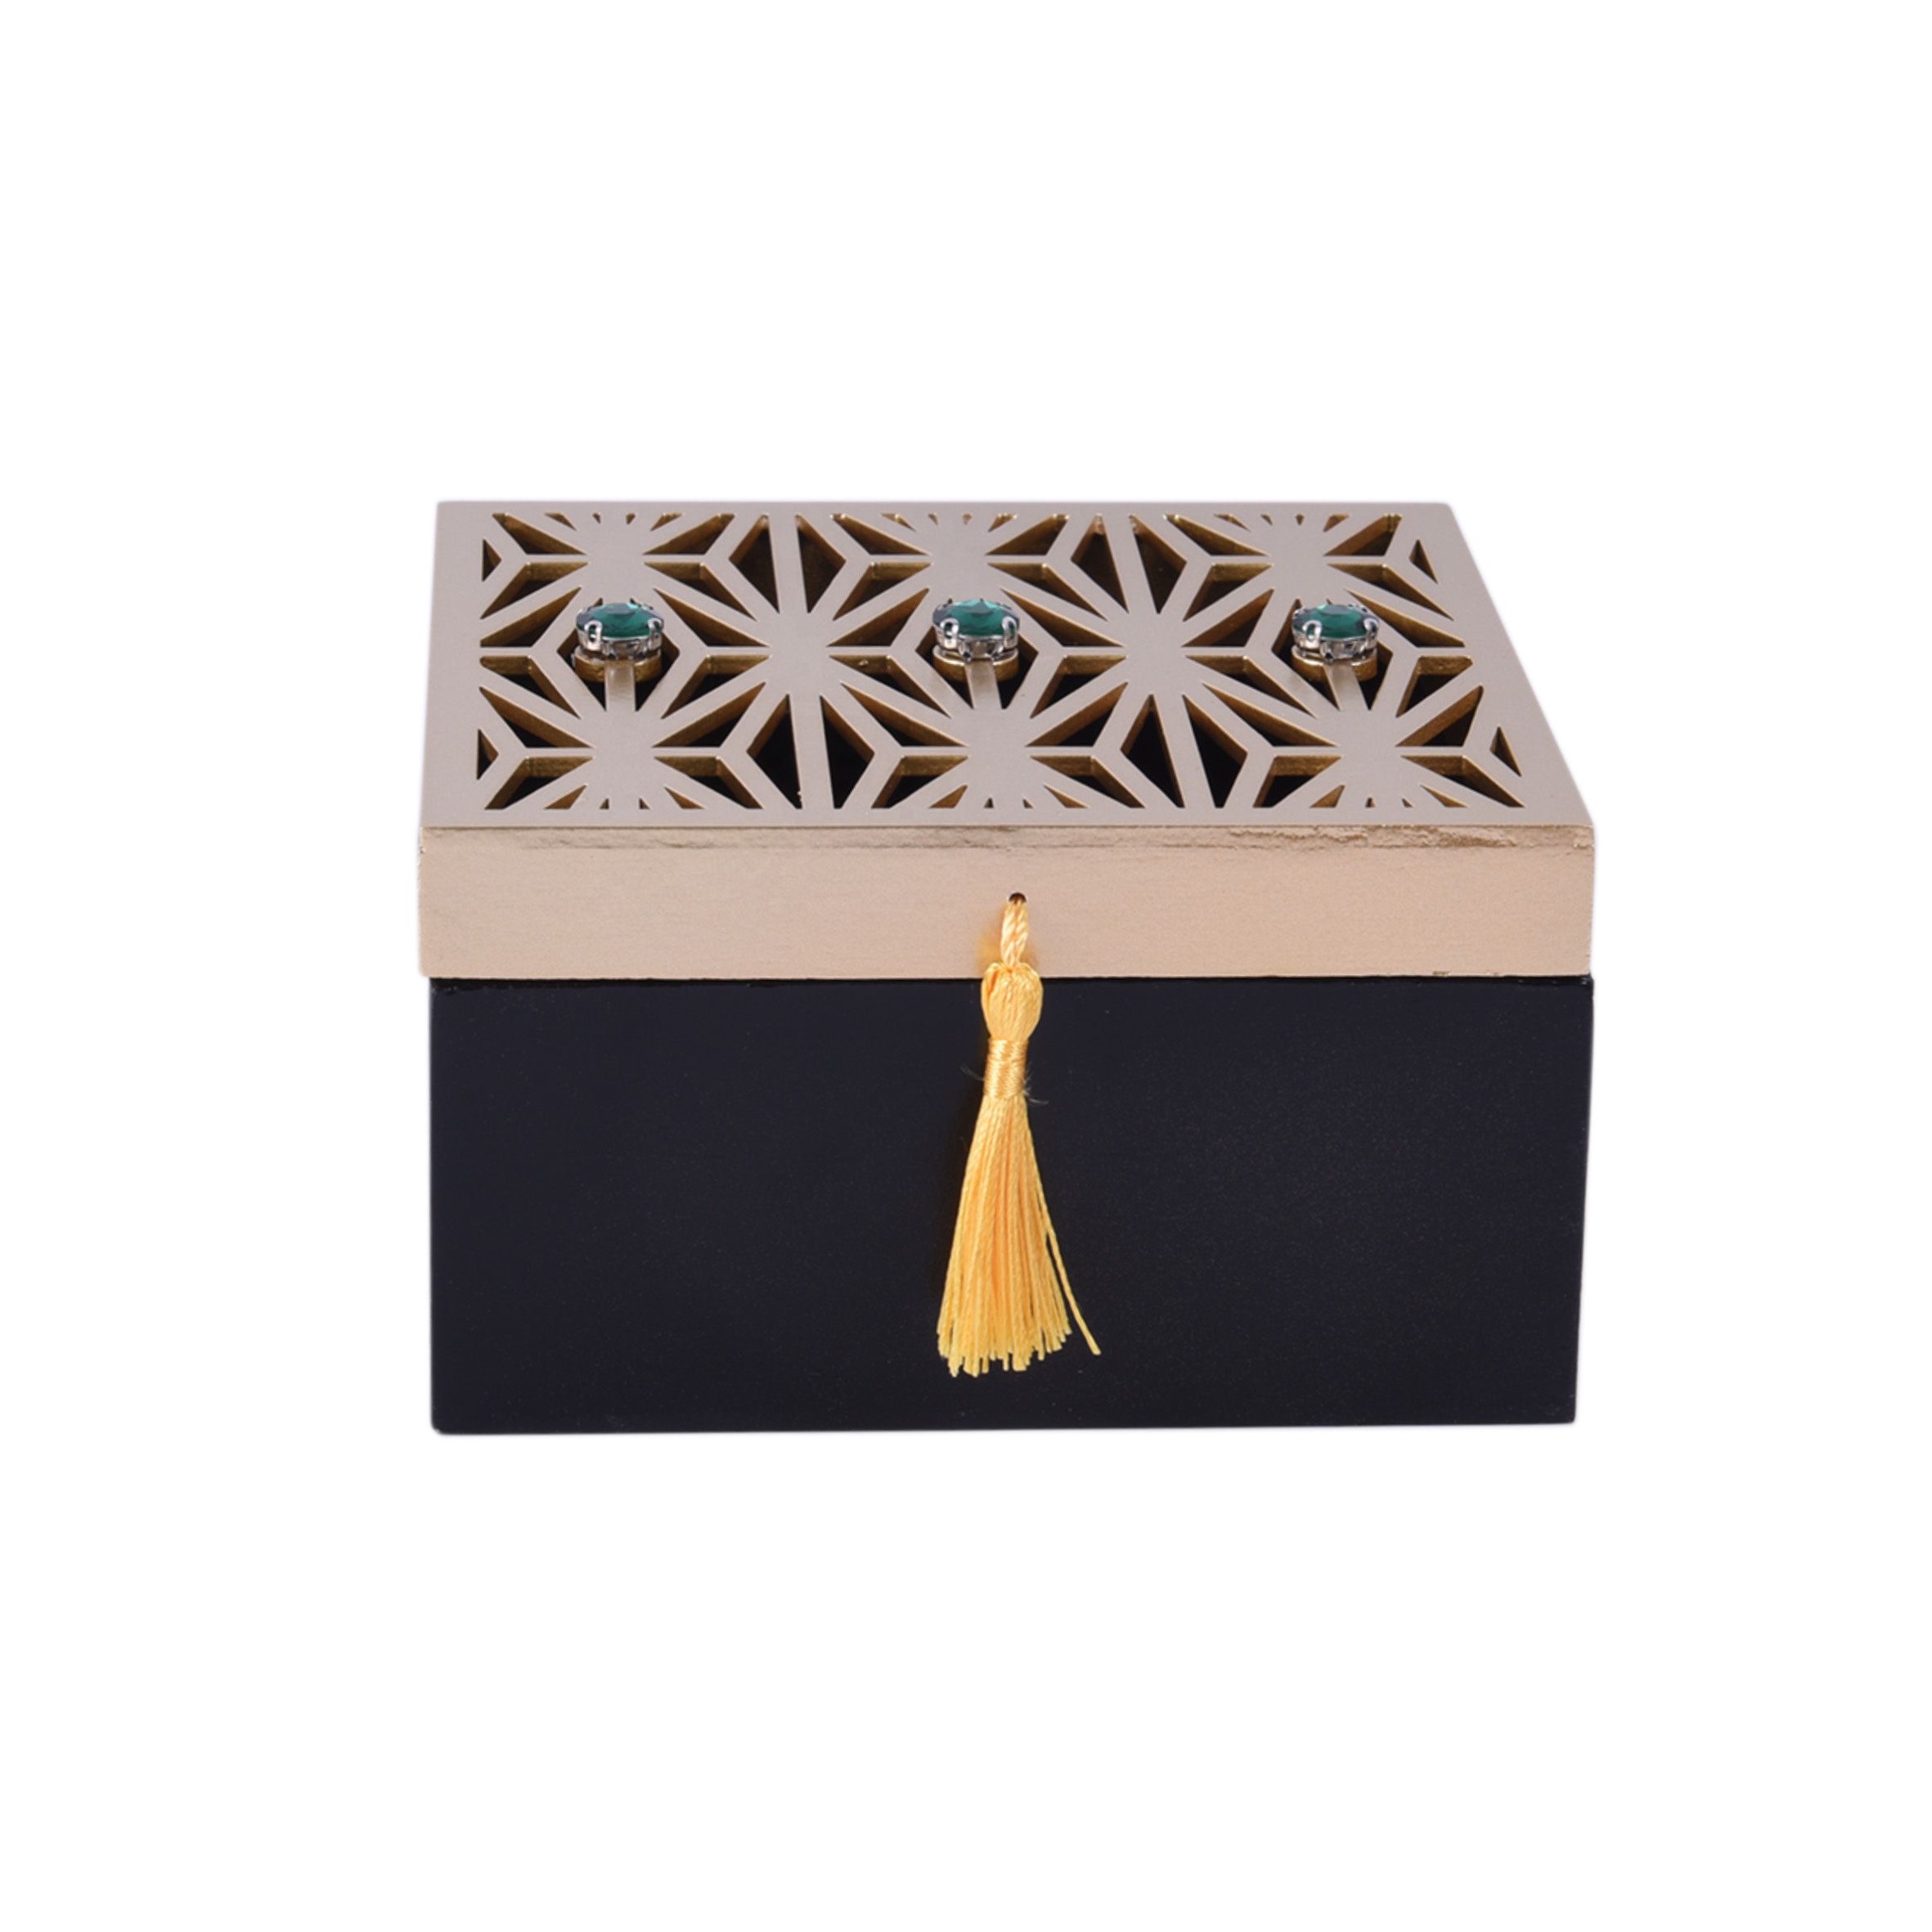 Golden Top tassel Square Decorative Box Storage Box Packaging Boxes